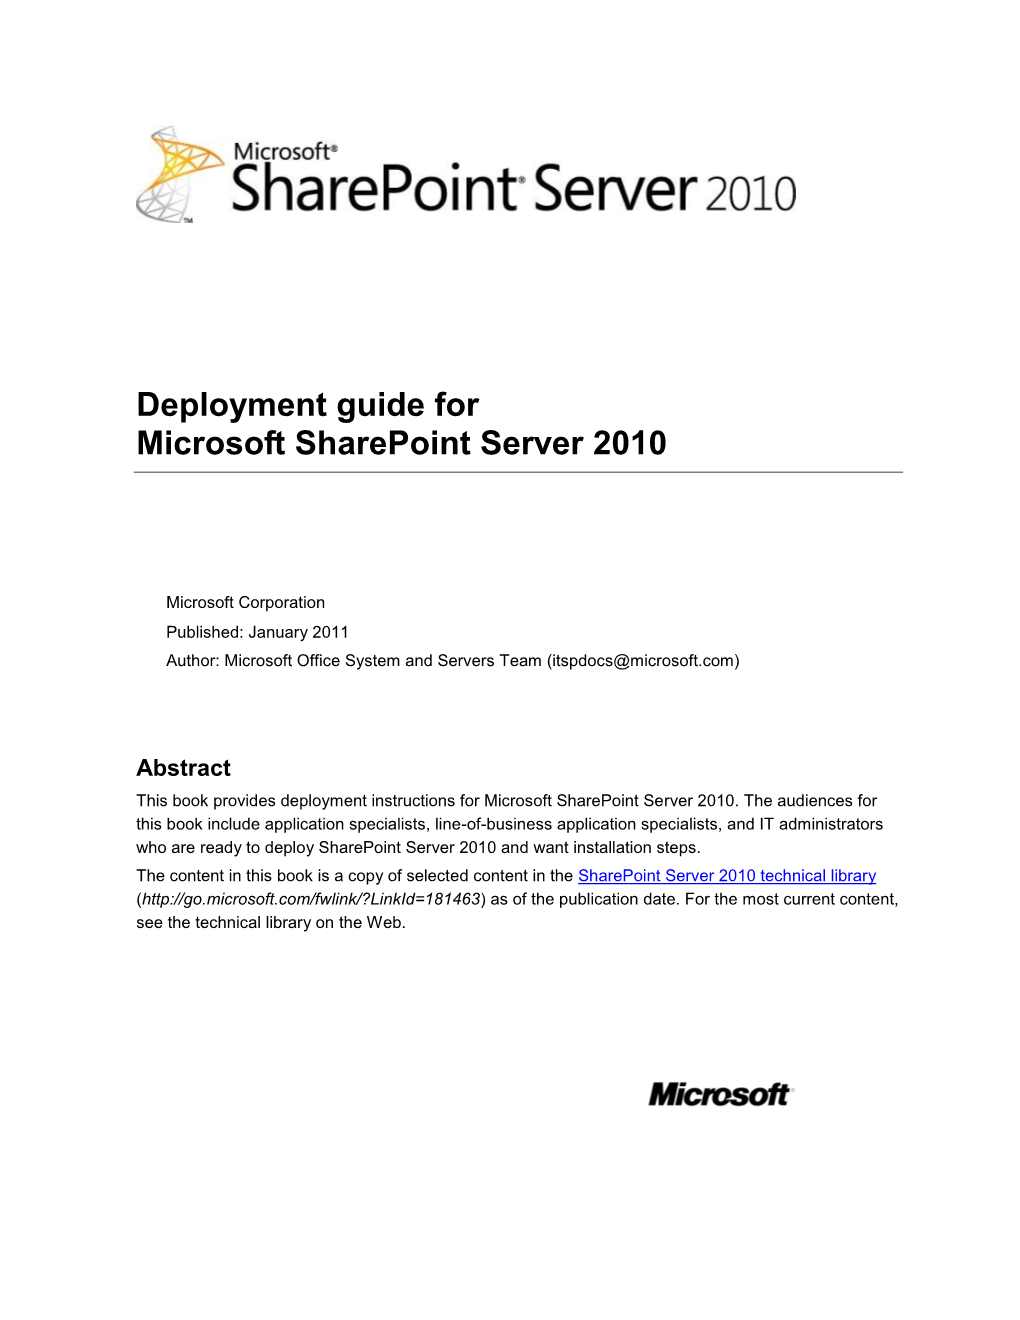 Deployment Guide for Microsoft Sharepoint Server 2010